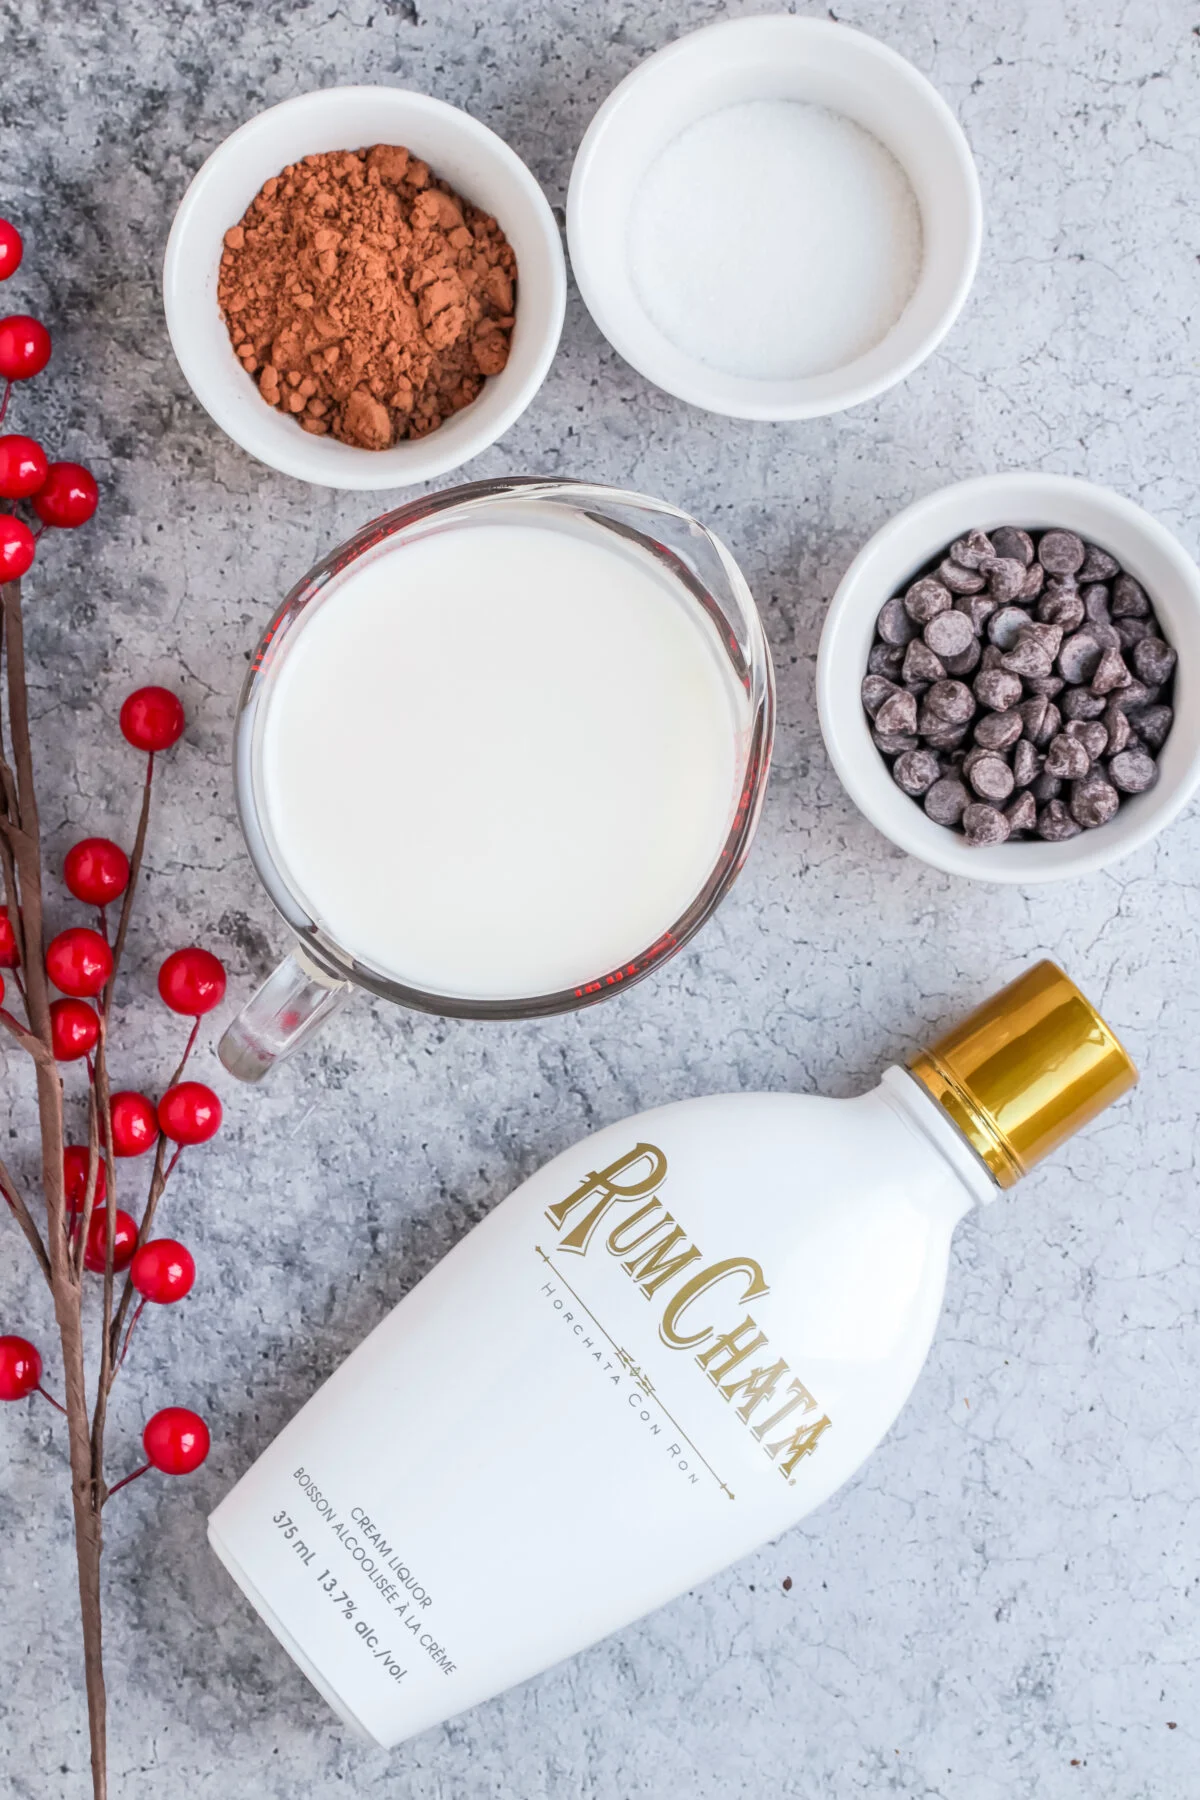 Ingredients for RumChata Hot Cocoa